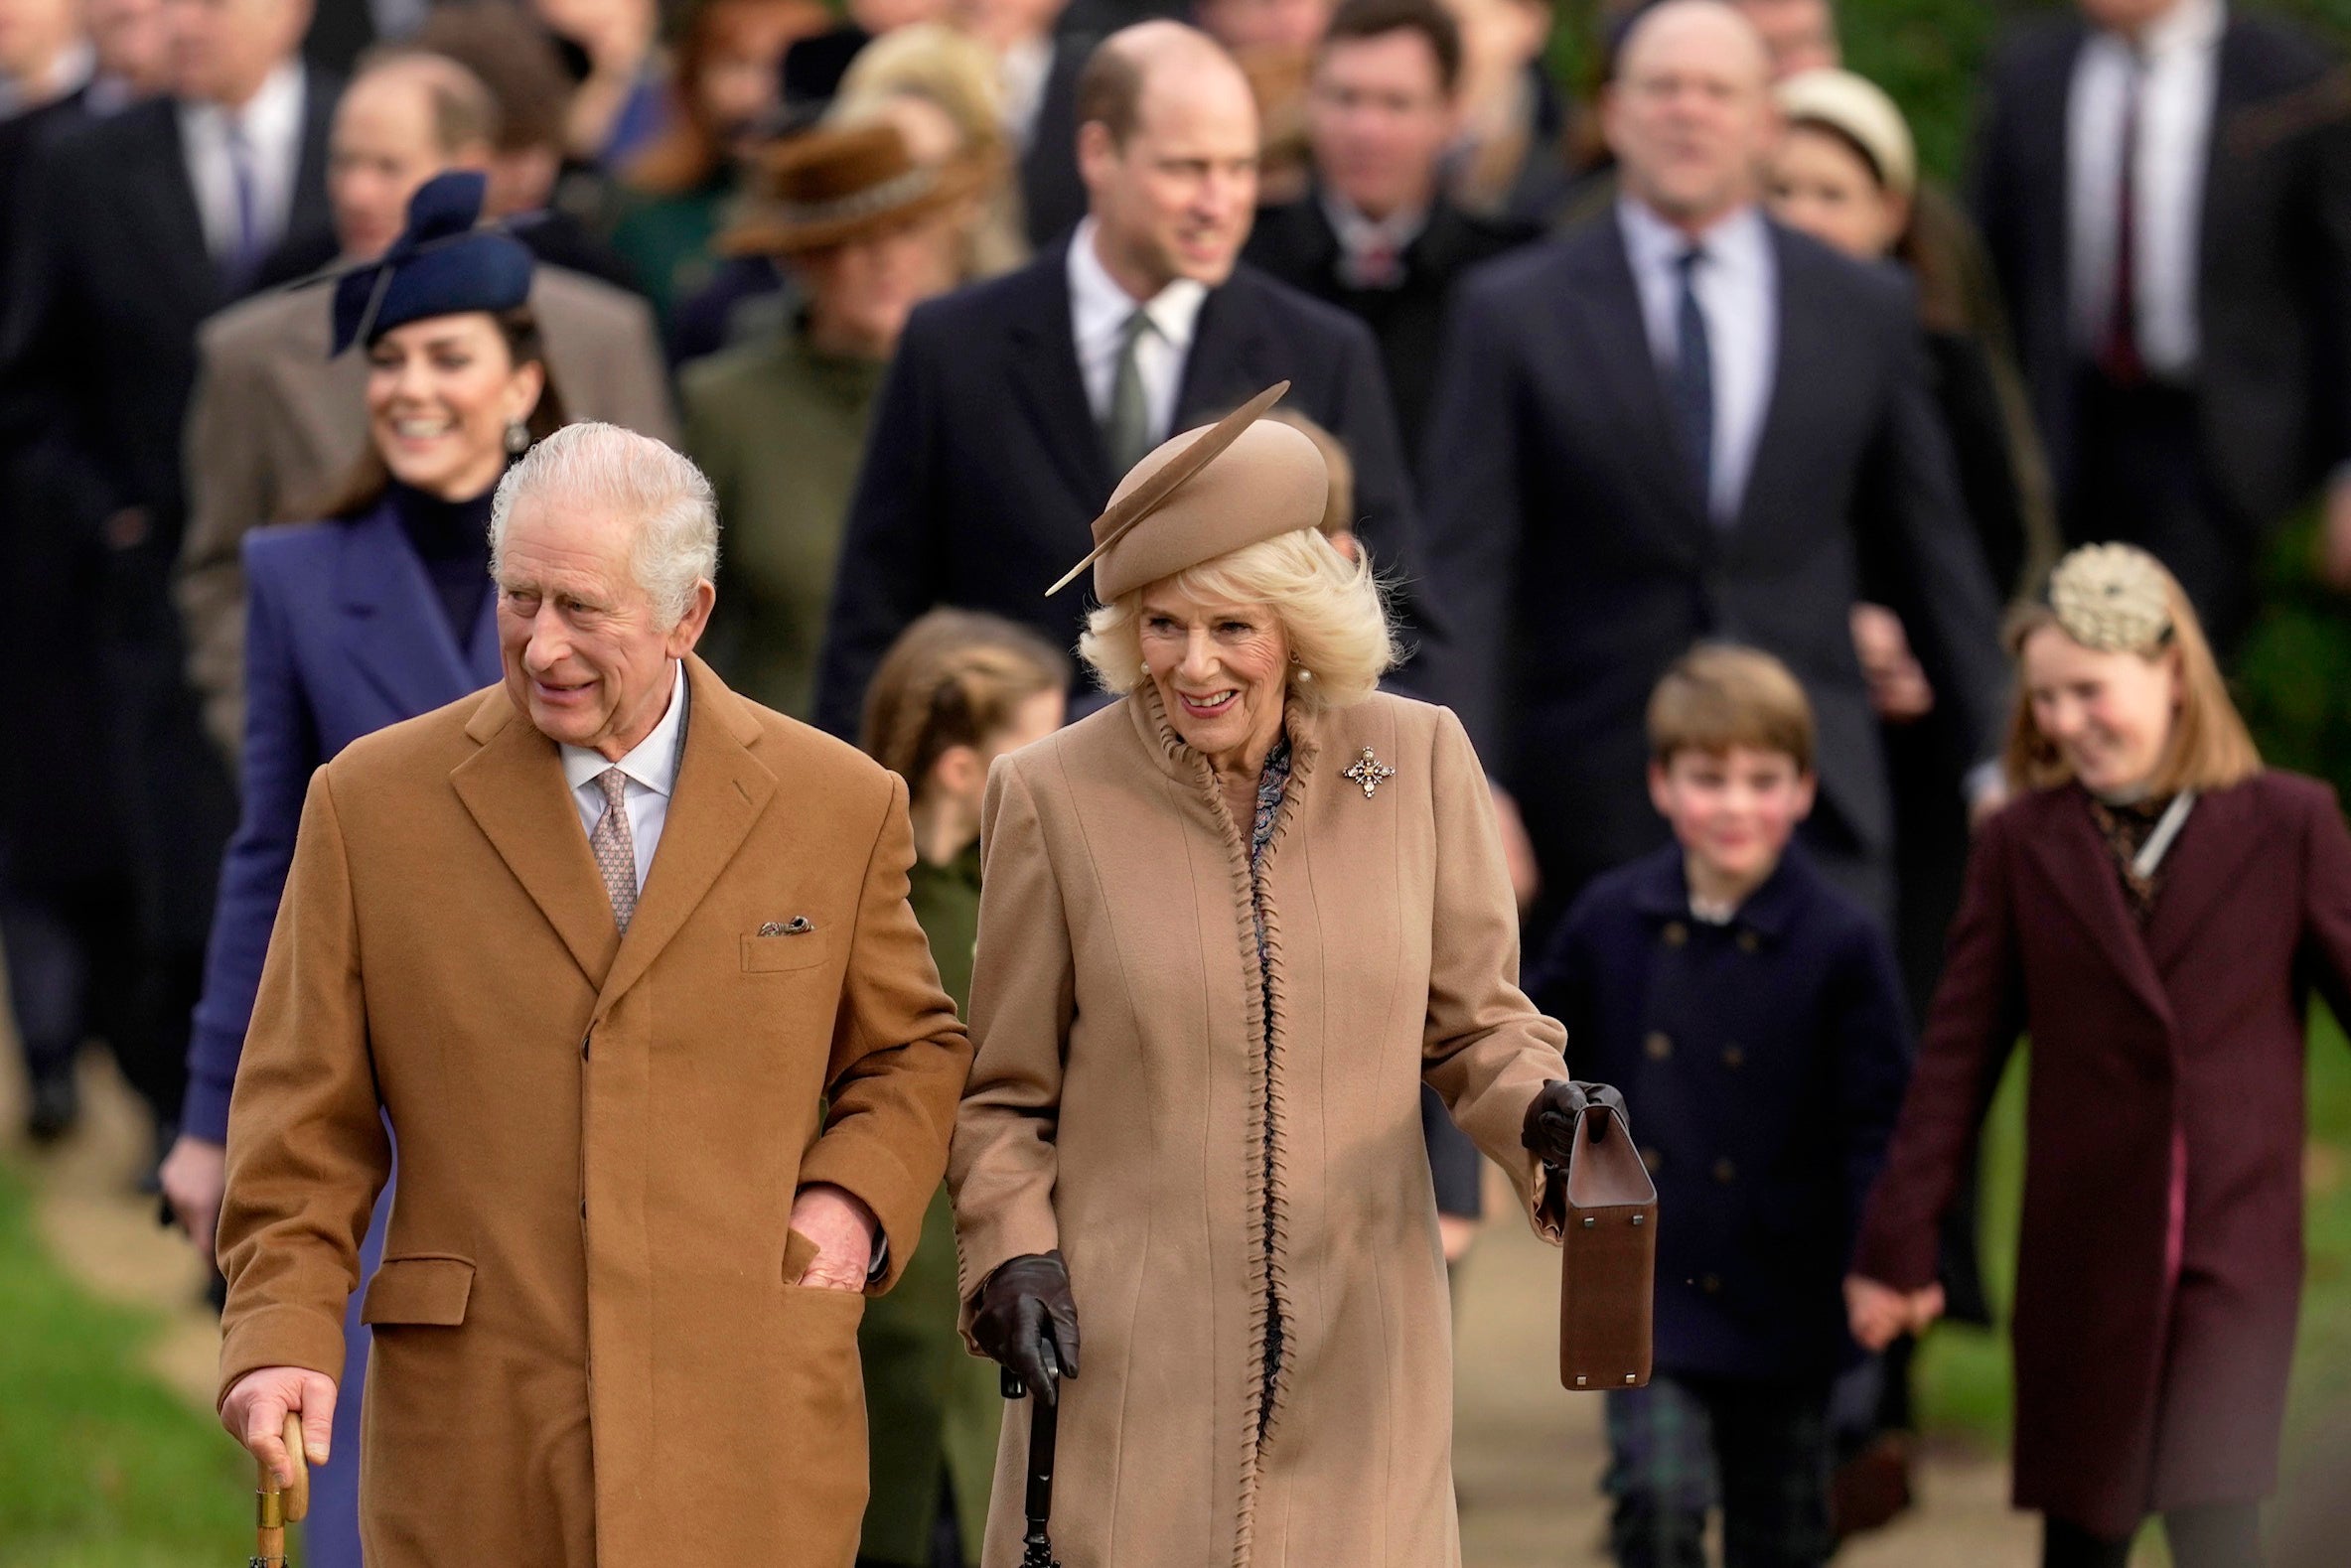 Charles, pictured with wife Camilla, is undergoing treatment for cancer